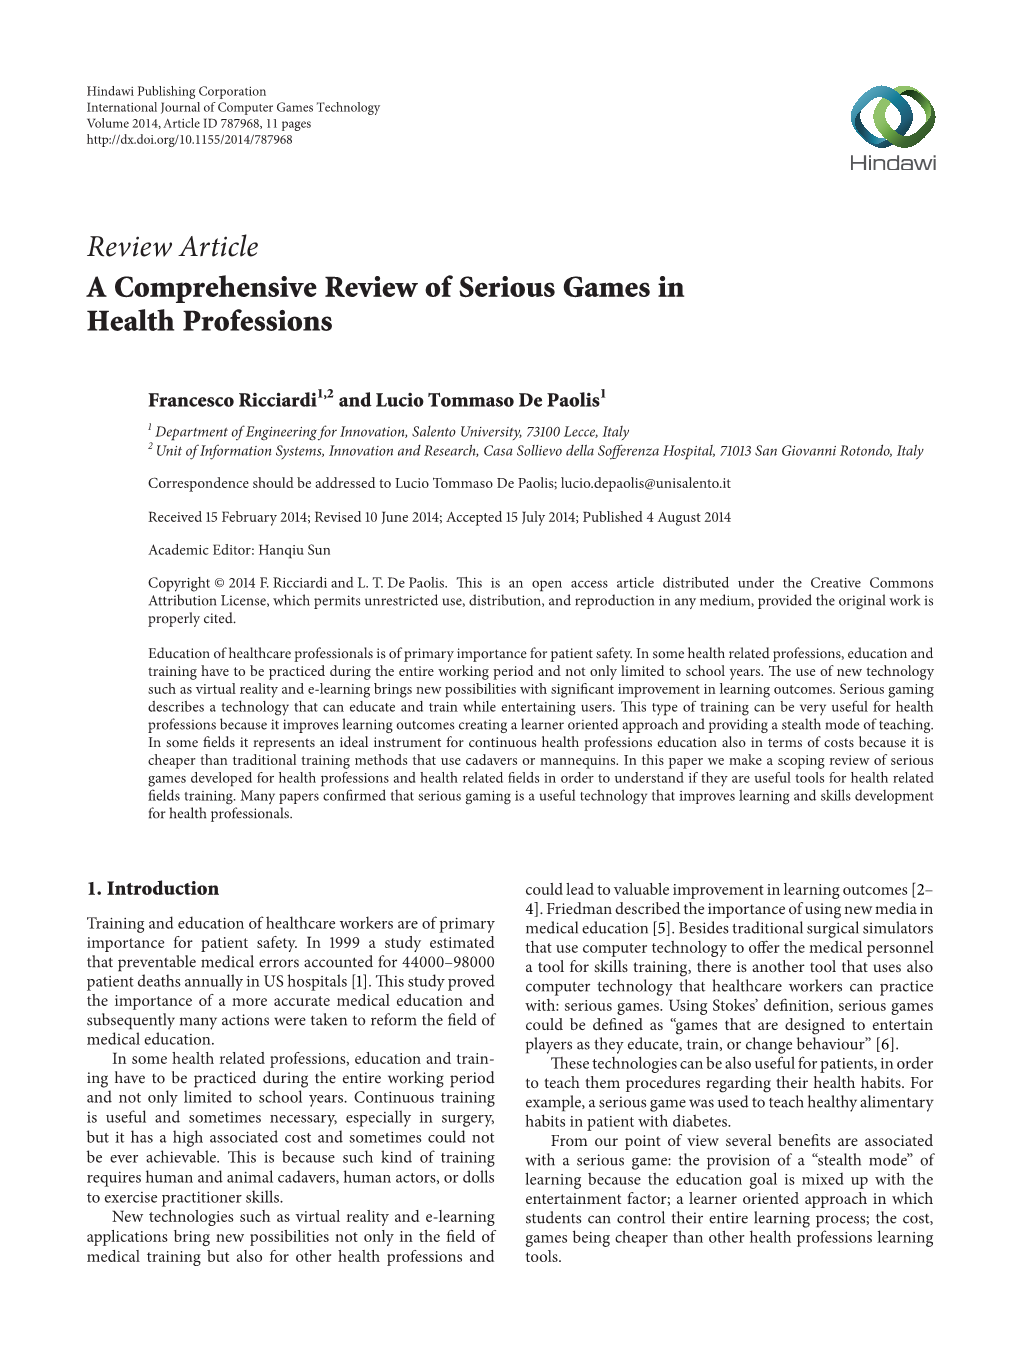 A Comprehensive Review of Serious Games in Health Professions